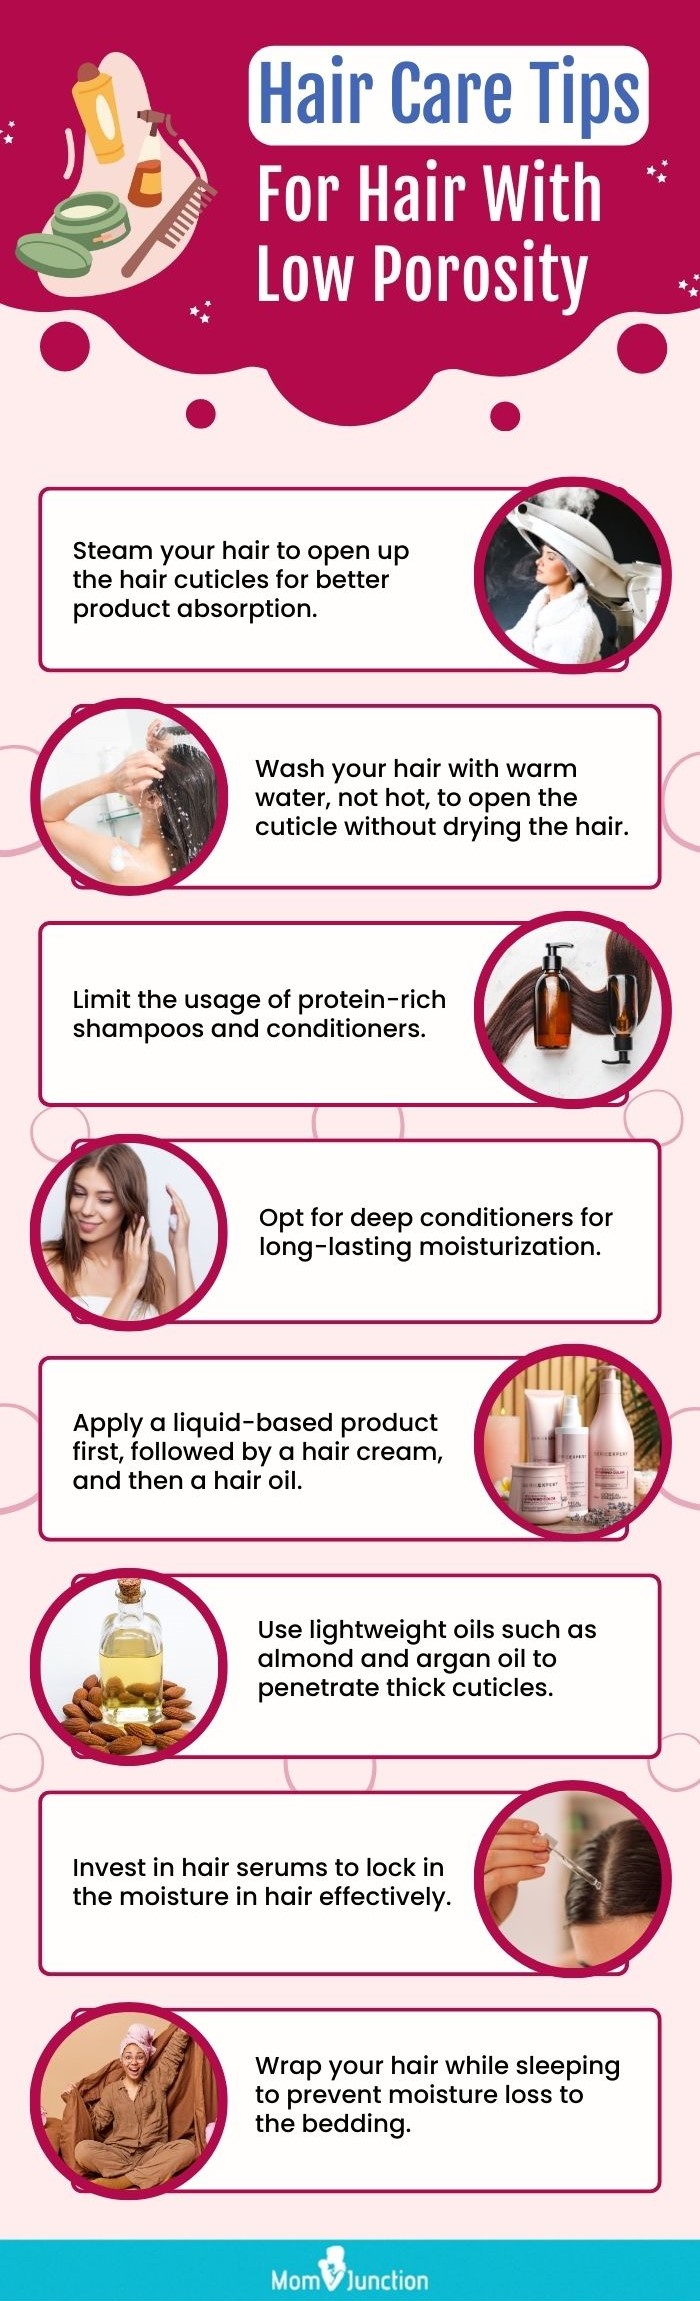 Hair Care Tips For Hair With Low Porosity (infographic)